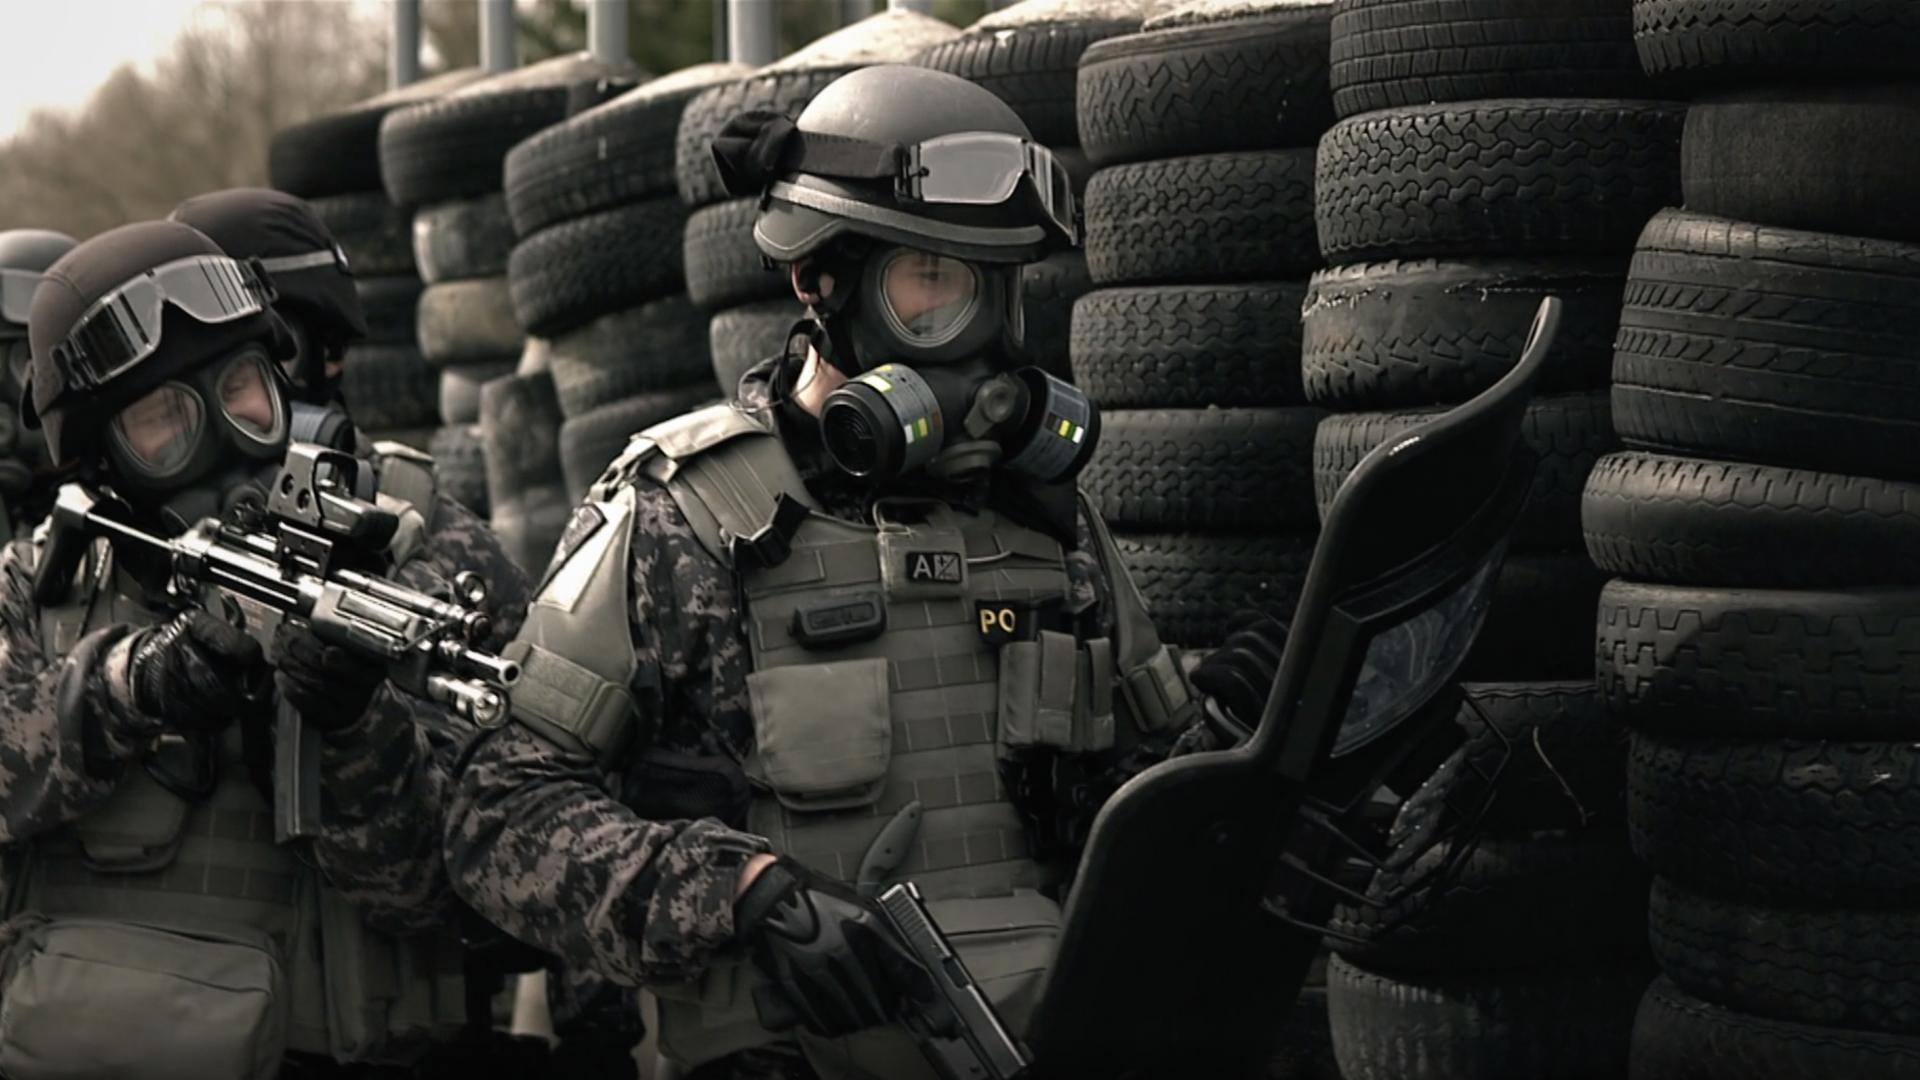 Introduction to Police Special Operations